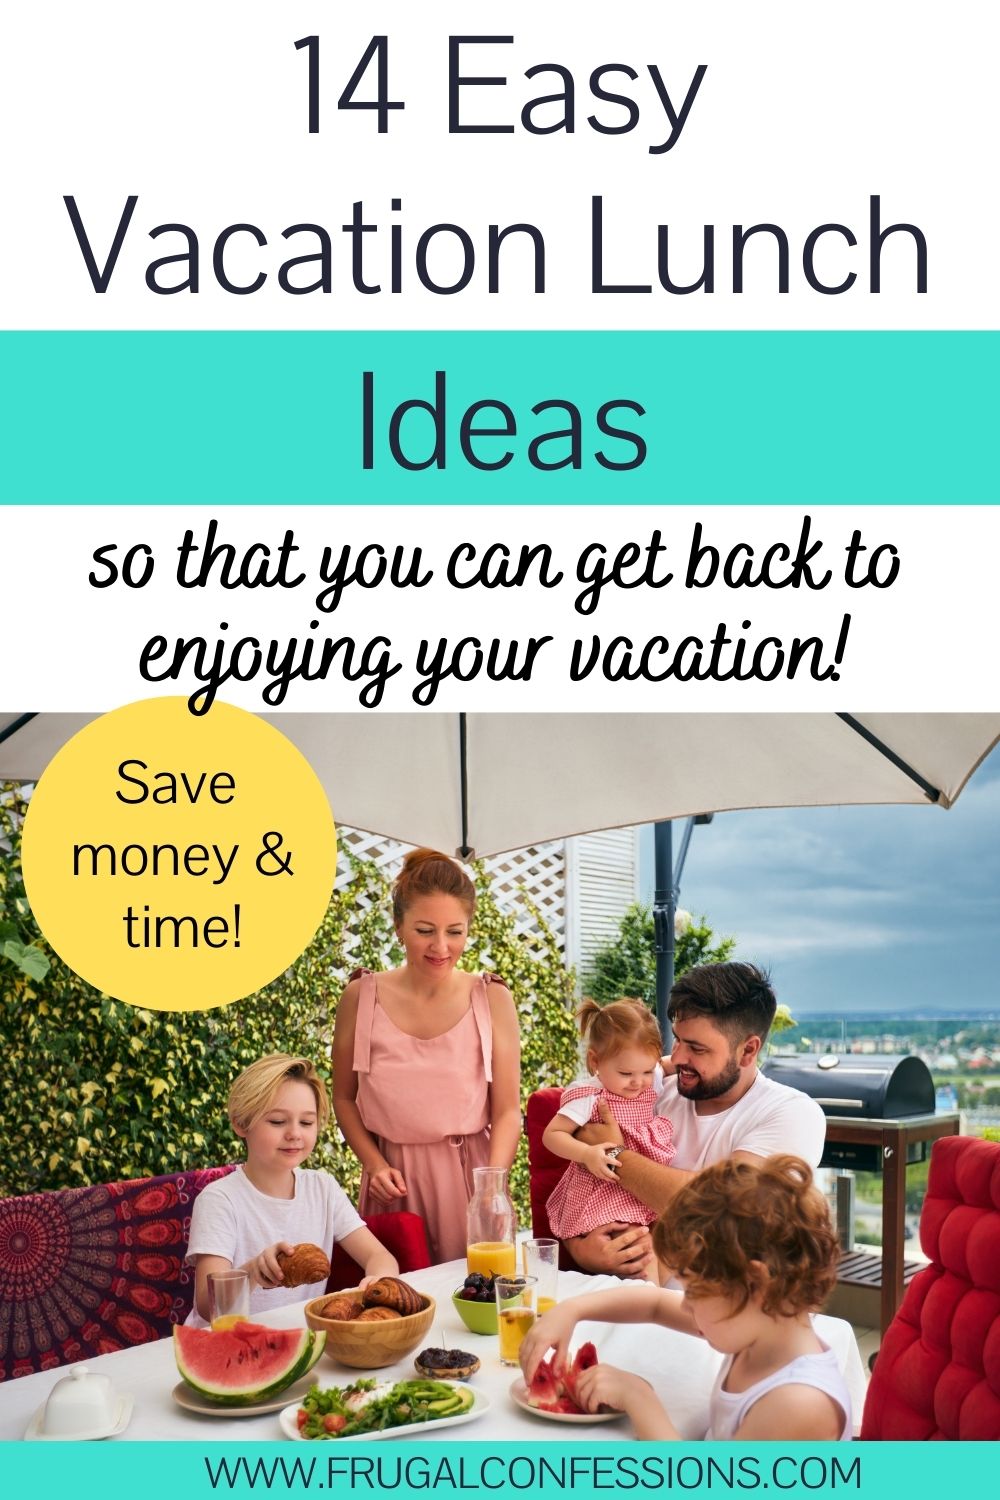 family eating lunch outside while on vacation, text overlay "14 easy vacation lunch ideas"